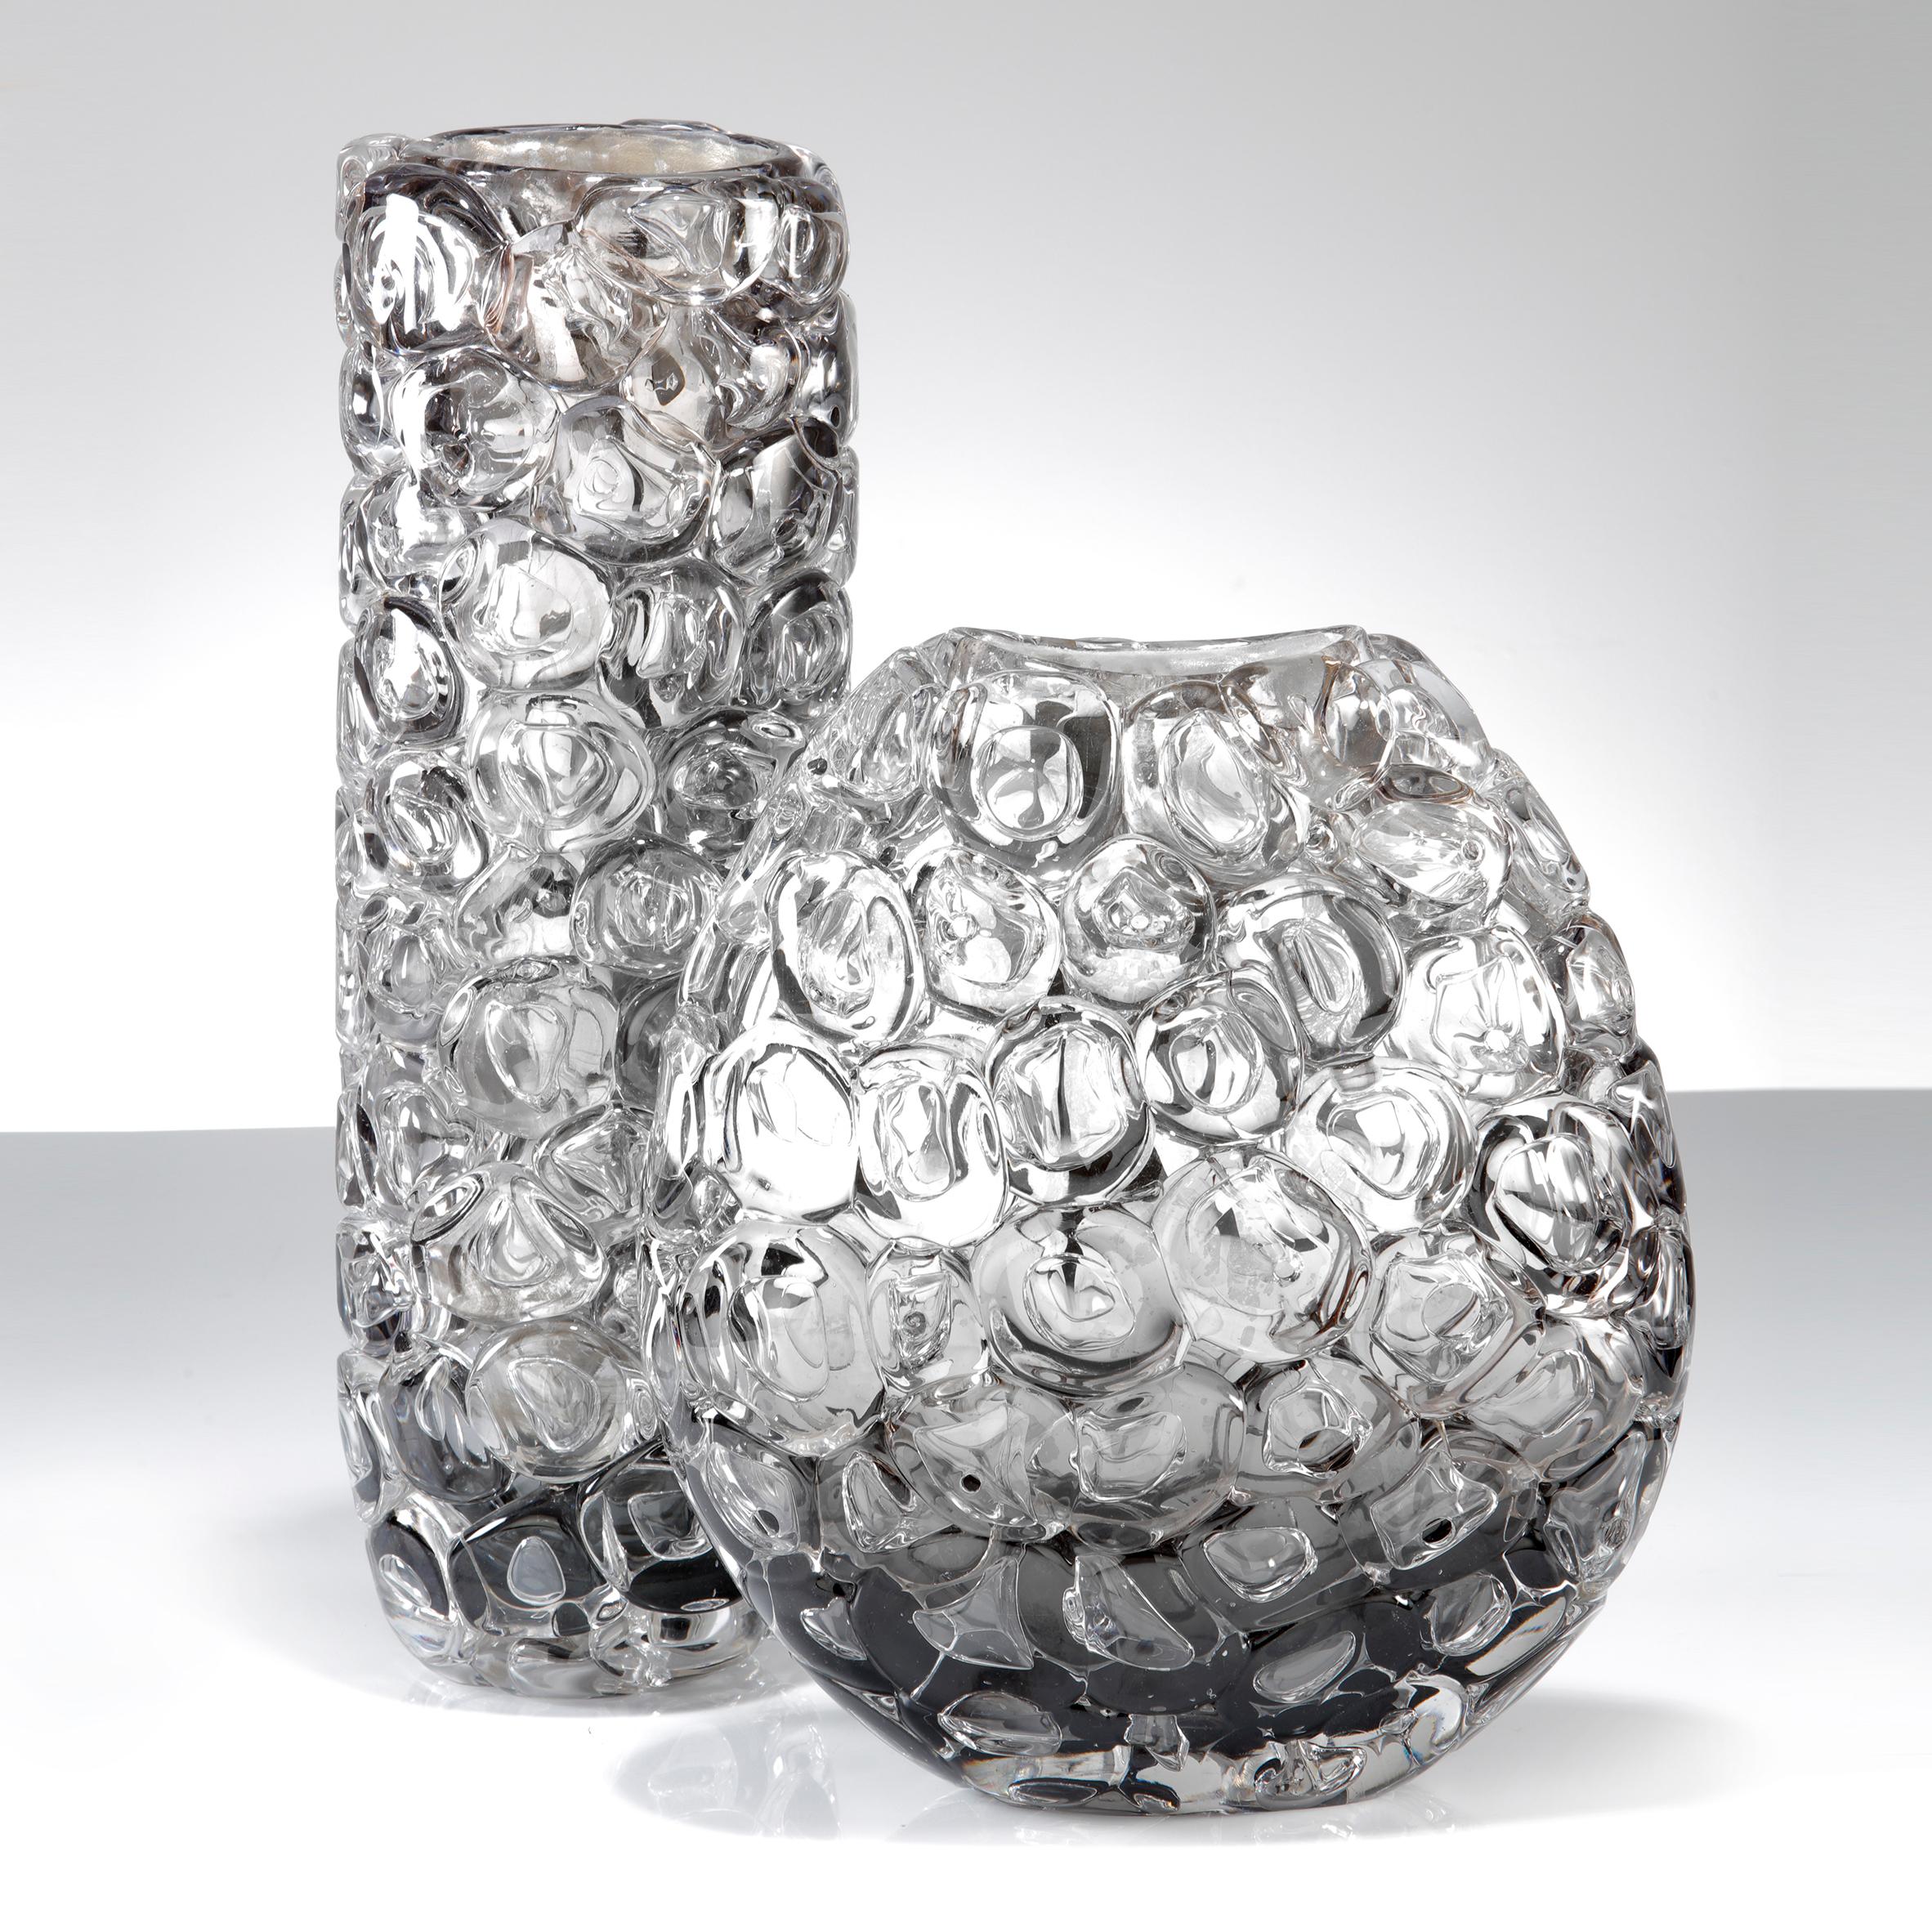 Contemporary Bubblewrap in Monochrome I, a Silver and Clear Glass Vase by Allister Malcolm